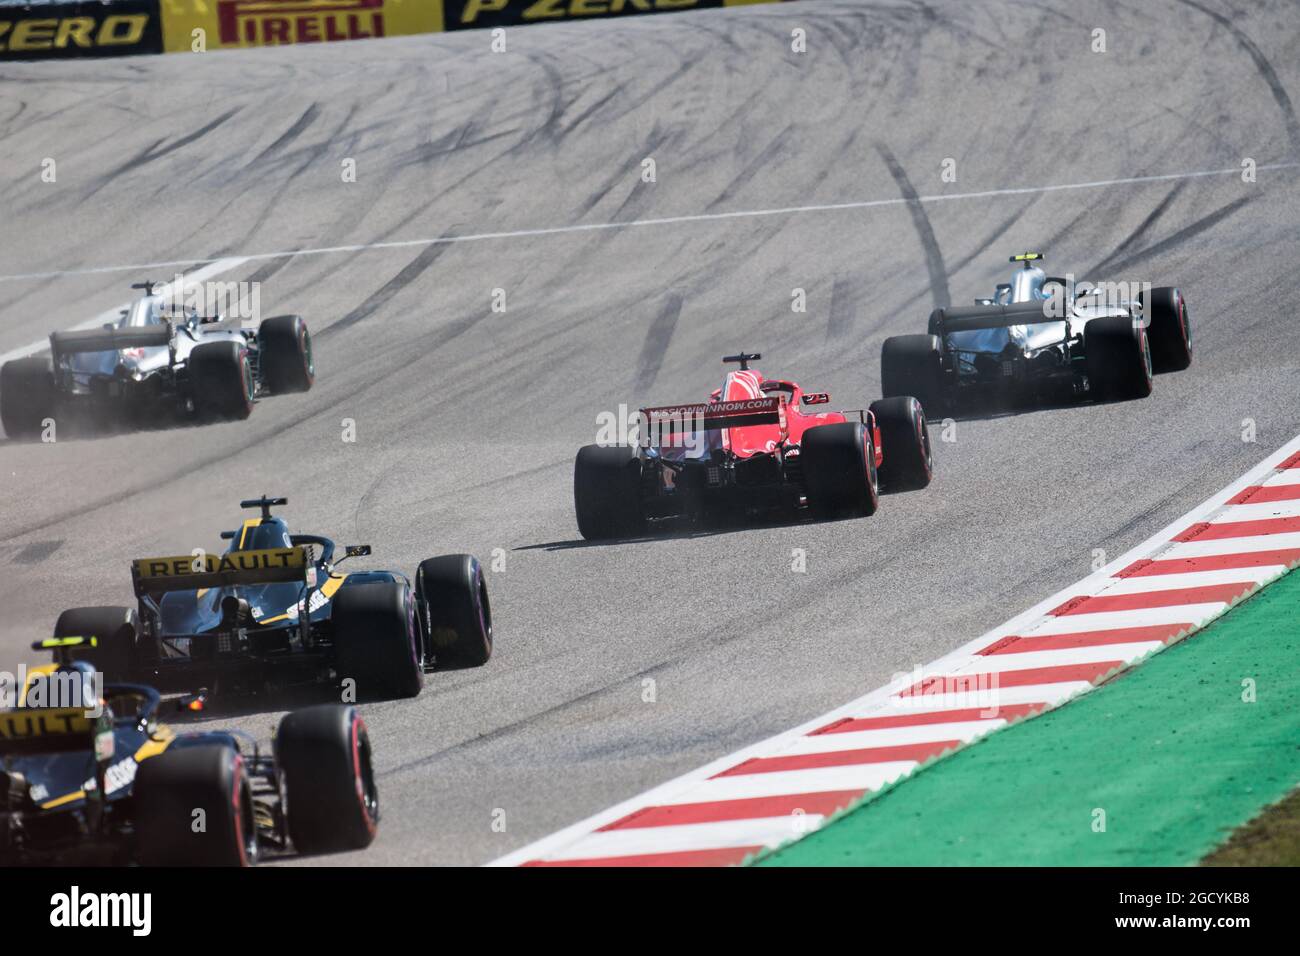 The start of the race. United States Grand Prix, Sunday 21st October 2018. Circuit of the Americas, Austin, Texas, USA. Stock Photo